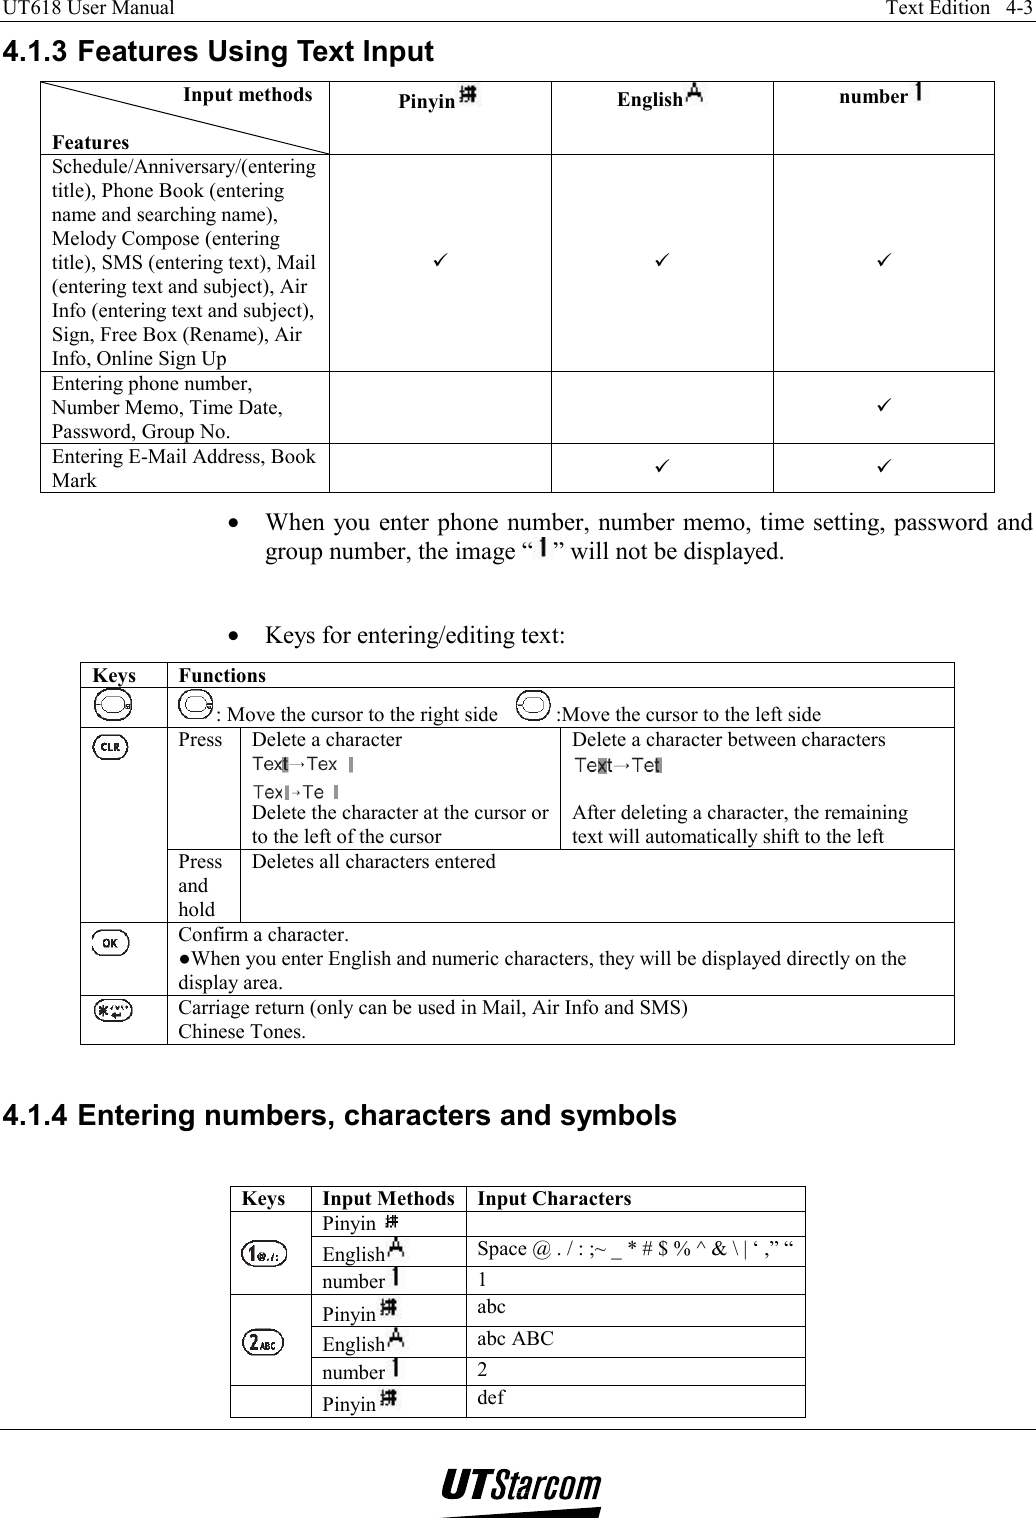 UT618 User Manual    Text Edition   4-3   4.1.3 Features Using Text Input                          Input methods            Features             Pinyin  English  number  Schedule/Anniversary/(entering title), Phone Book (entering name and searching name), Melody Compose (entering title), SMS (entering text), Mail (entering text and subject), Air Info (entering text and subject), Sign, Free Box (Rename), Air Info, Online Sign Up 9 9 9 Entering phone number, Number Memo, Time Date, Password, Group No.   9 Entering E-Mail Address, Book Mark  9 9 •  When you enter phone number, number memo, time setting, password and group number, the image “ ” will not be displayed.  •  Keys for entering/editing text: Keys Functions  : Move the cursor to the right side    :Move the cursor to the left side  Press   Delete a character  Delete the character at the cursor or to the left of the cursor Delete a character between characters  After deleting a character, the remaining text will automatically shift to the left  Press and hold Deletes all characters entered  Confirm a character. ●When you enter English and numeric characters, they will be displayed directly on the display area.  Carriage return (only can be used in Mail, Air Info and SMS) Chinese Tones.  4.1.4 Entering numbers, characters and symbols  Keys  Input Methods  Input Characters Pinyin    English  Space @ . / : ;~ _ * # $ % ^ &amp; \ | ‘ ,” “    number  1 Pinyin  abc English  abc ABC    number  2  Pinyin  def 